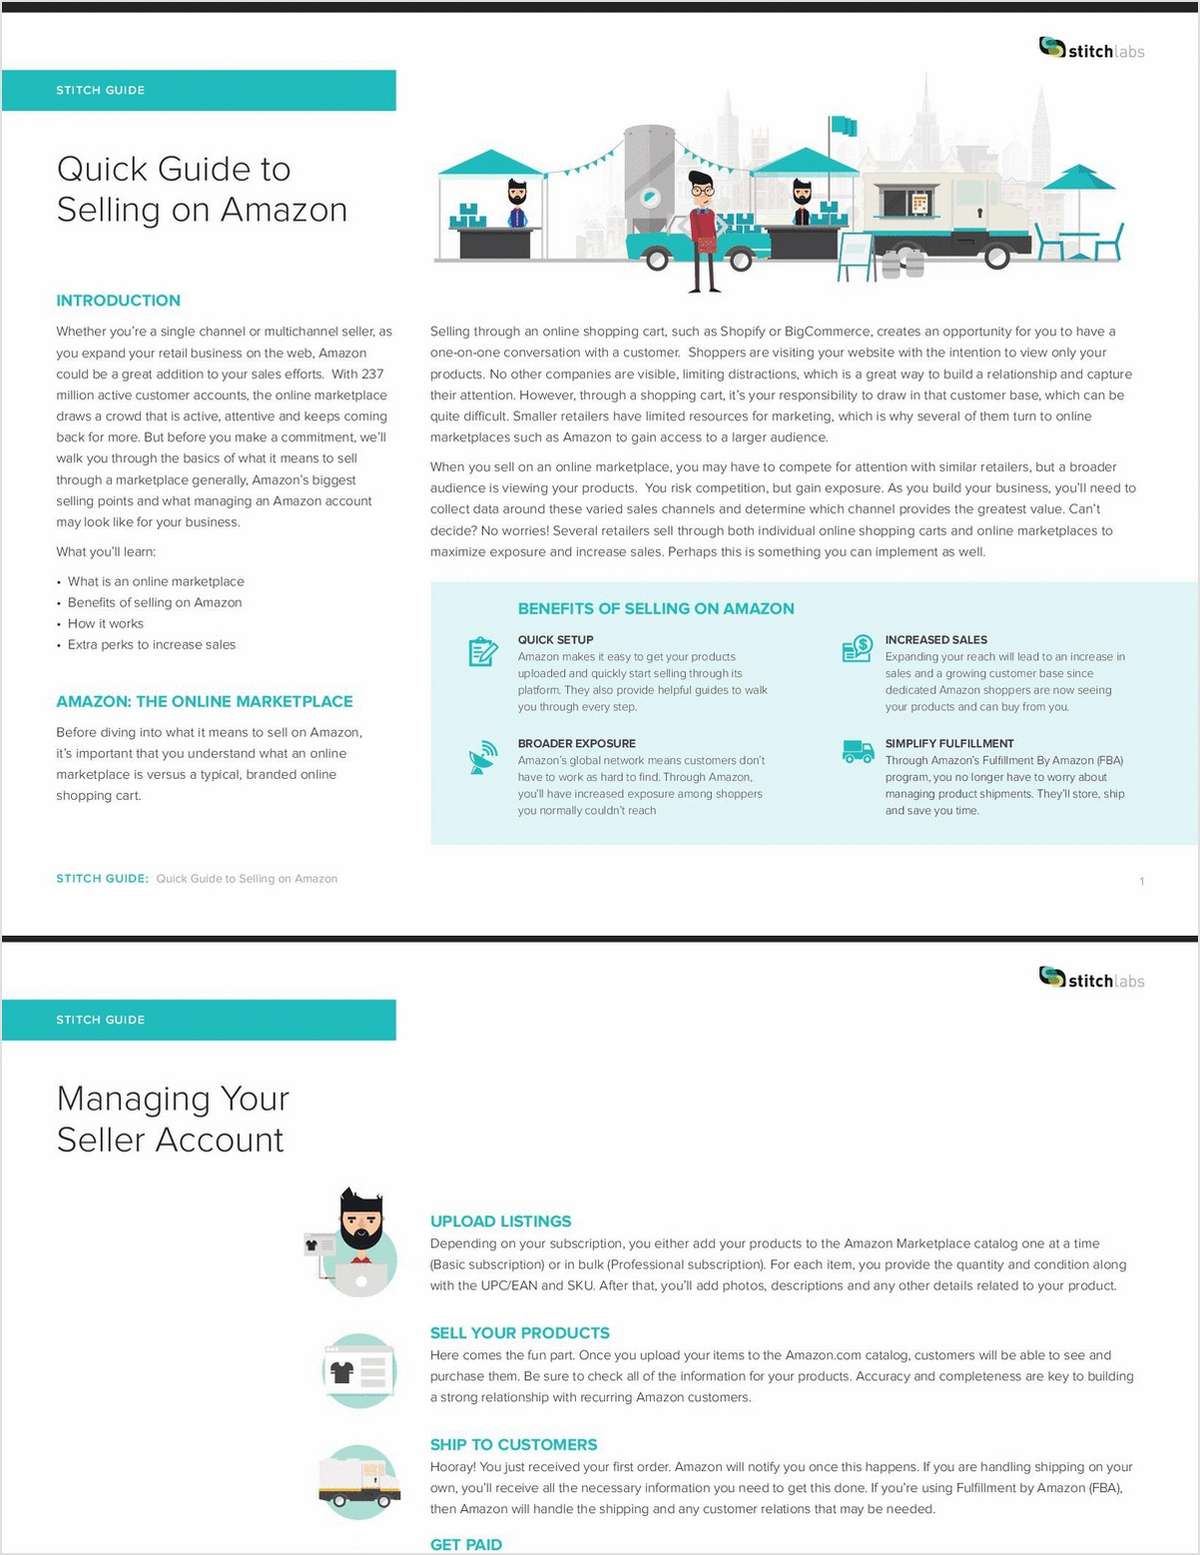 Quick Guide to Selling on Amazon